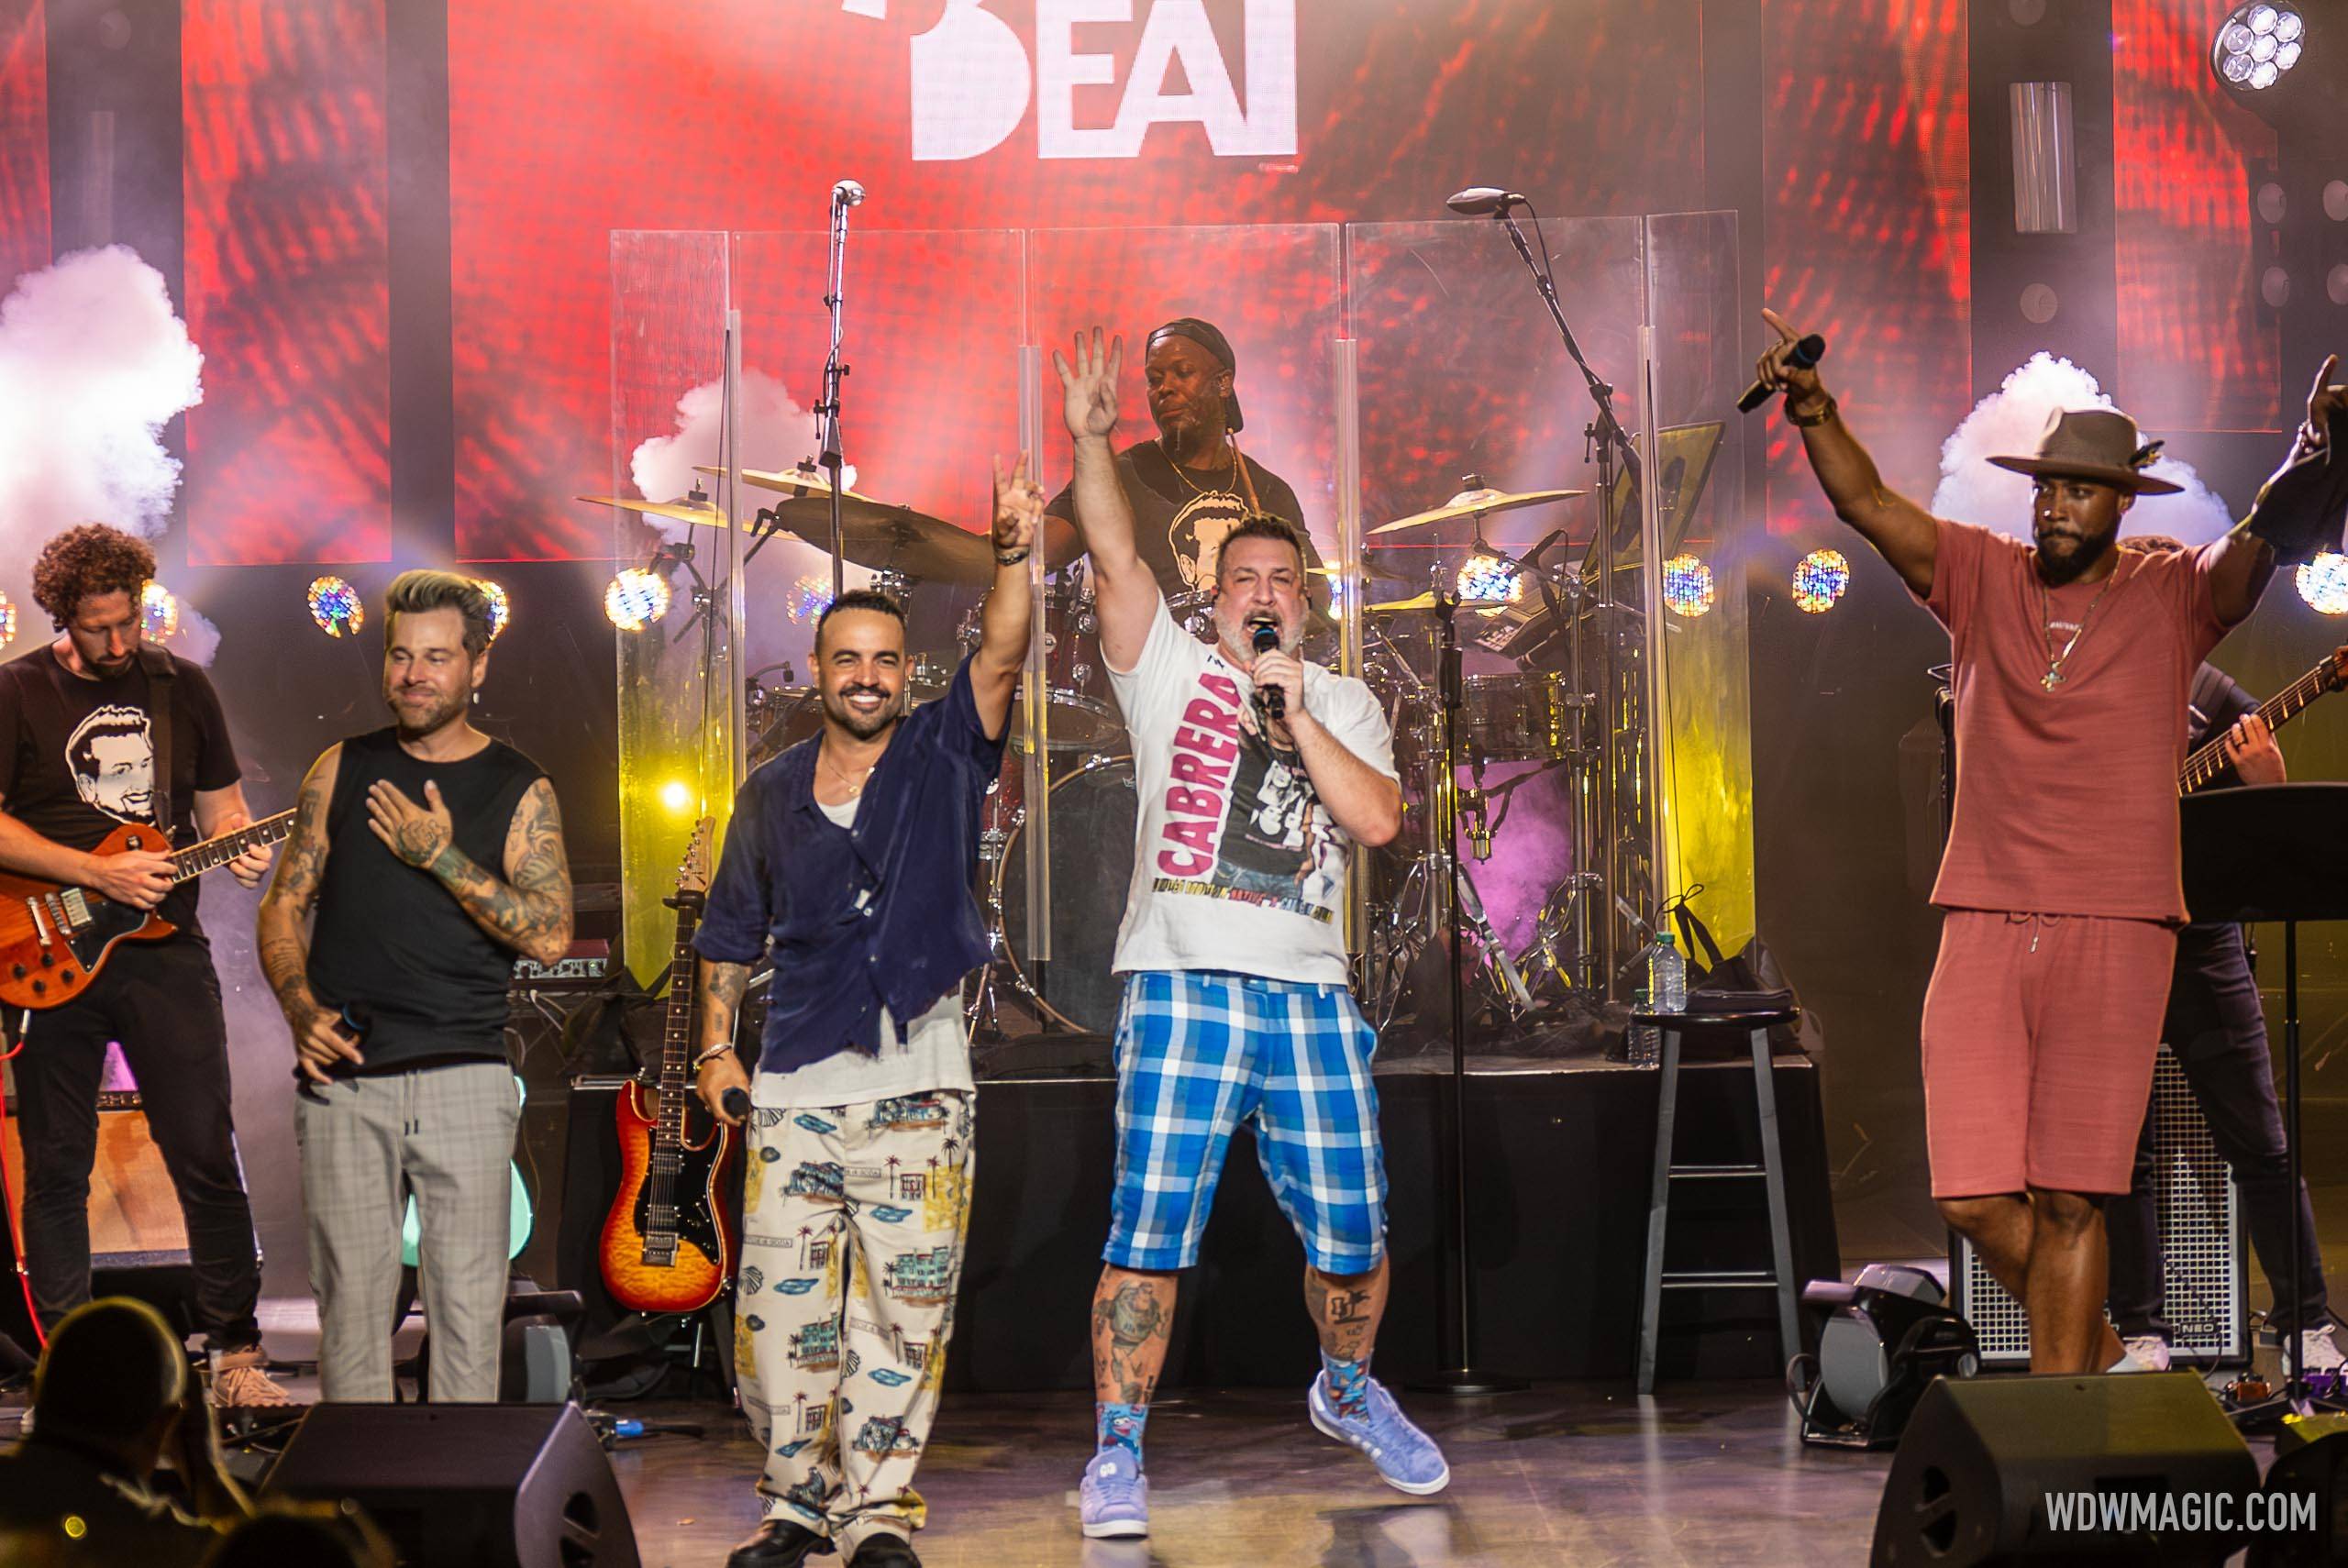 Eat to the Beat Concert Series - Joey Fatone and Friends